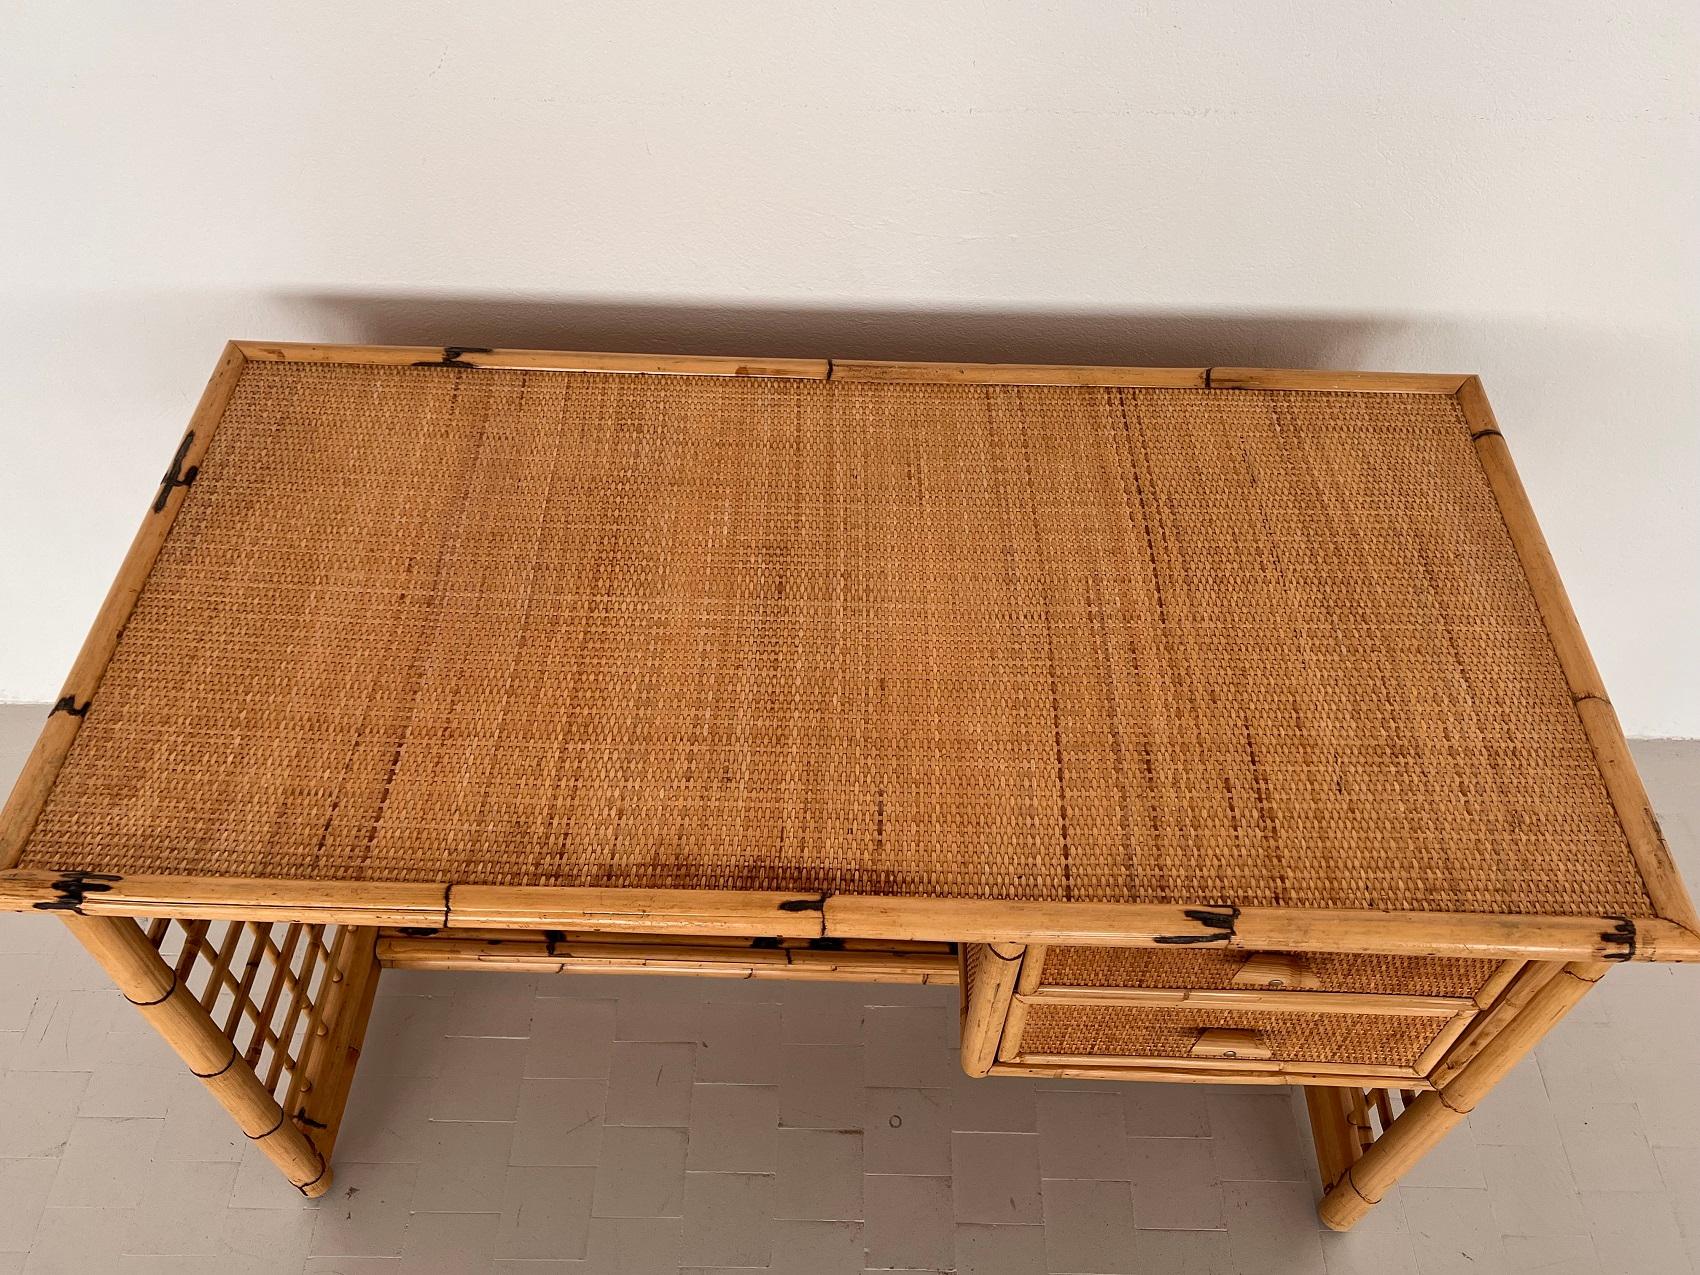 Italian Midcentury Bamboo and Rattan Desk or Vanity with two Drawers, 1970s For Sale 5